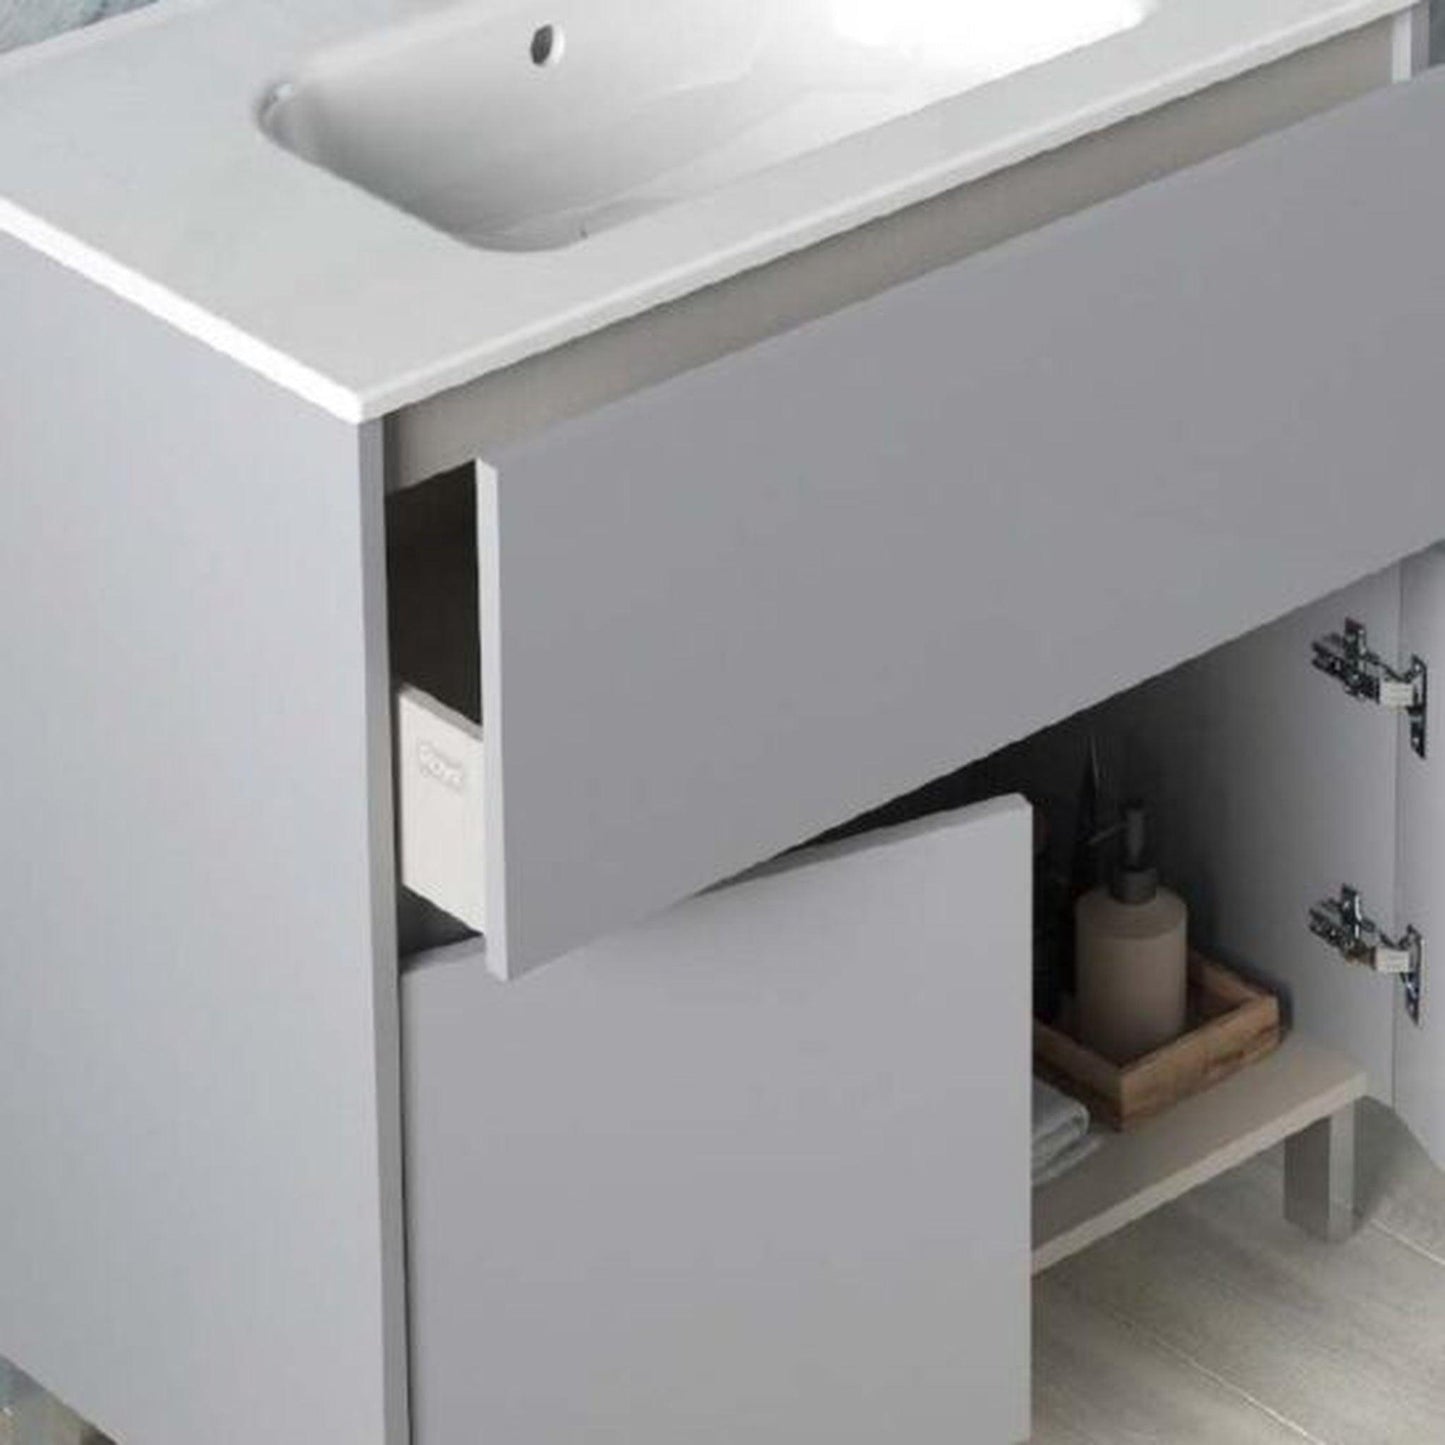 Royo Band 28" x 18" Gloss Galet Modern Freestanding Vanity With 1 Drawer and 2 Doors